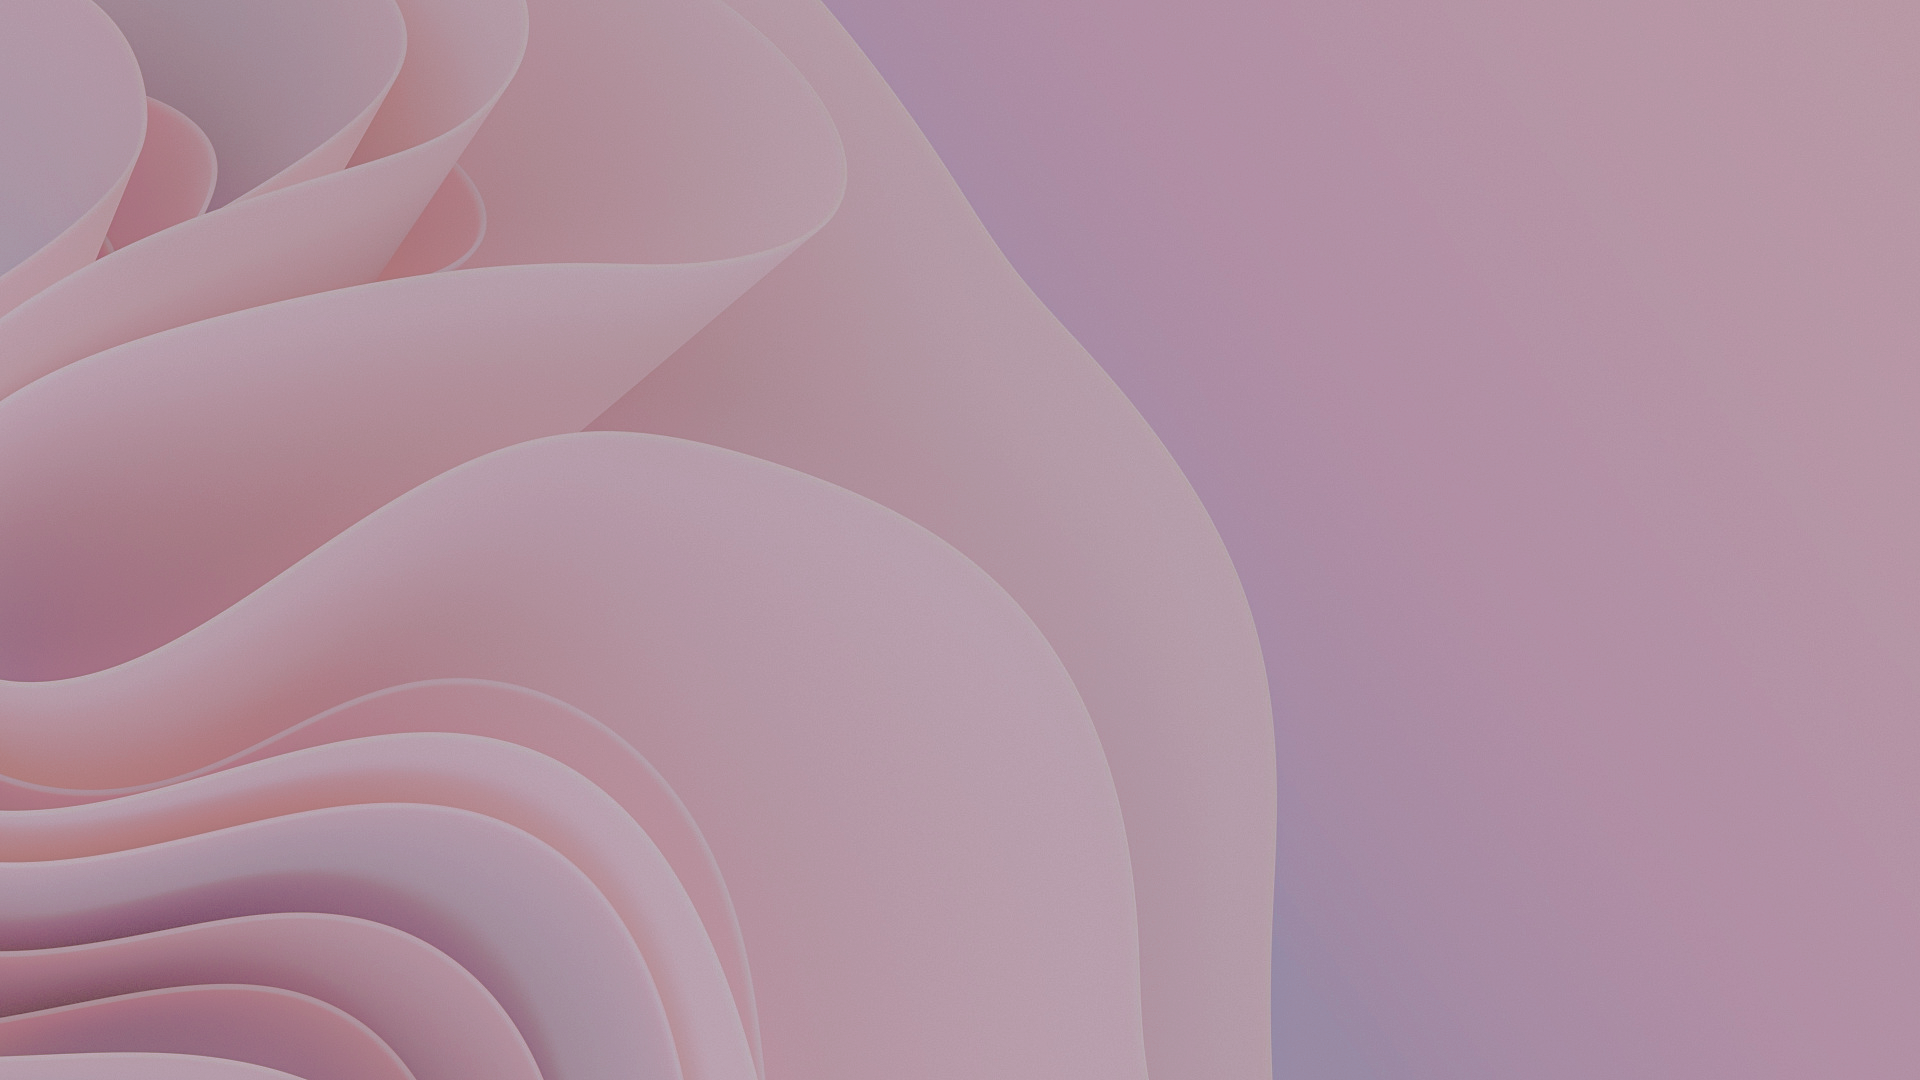 Waves Abstract Pastel Pink Background 1920x1080